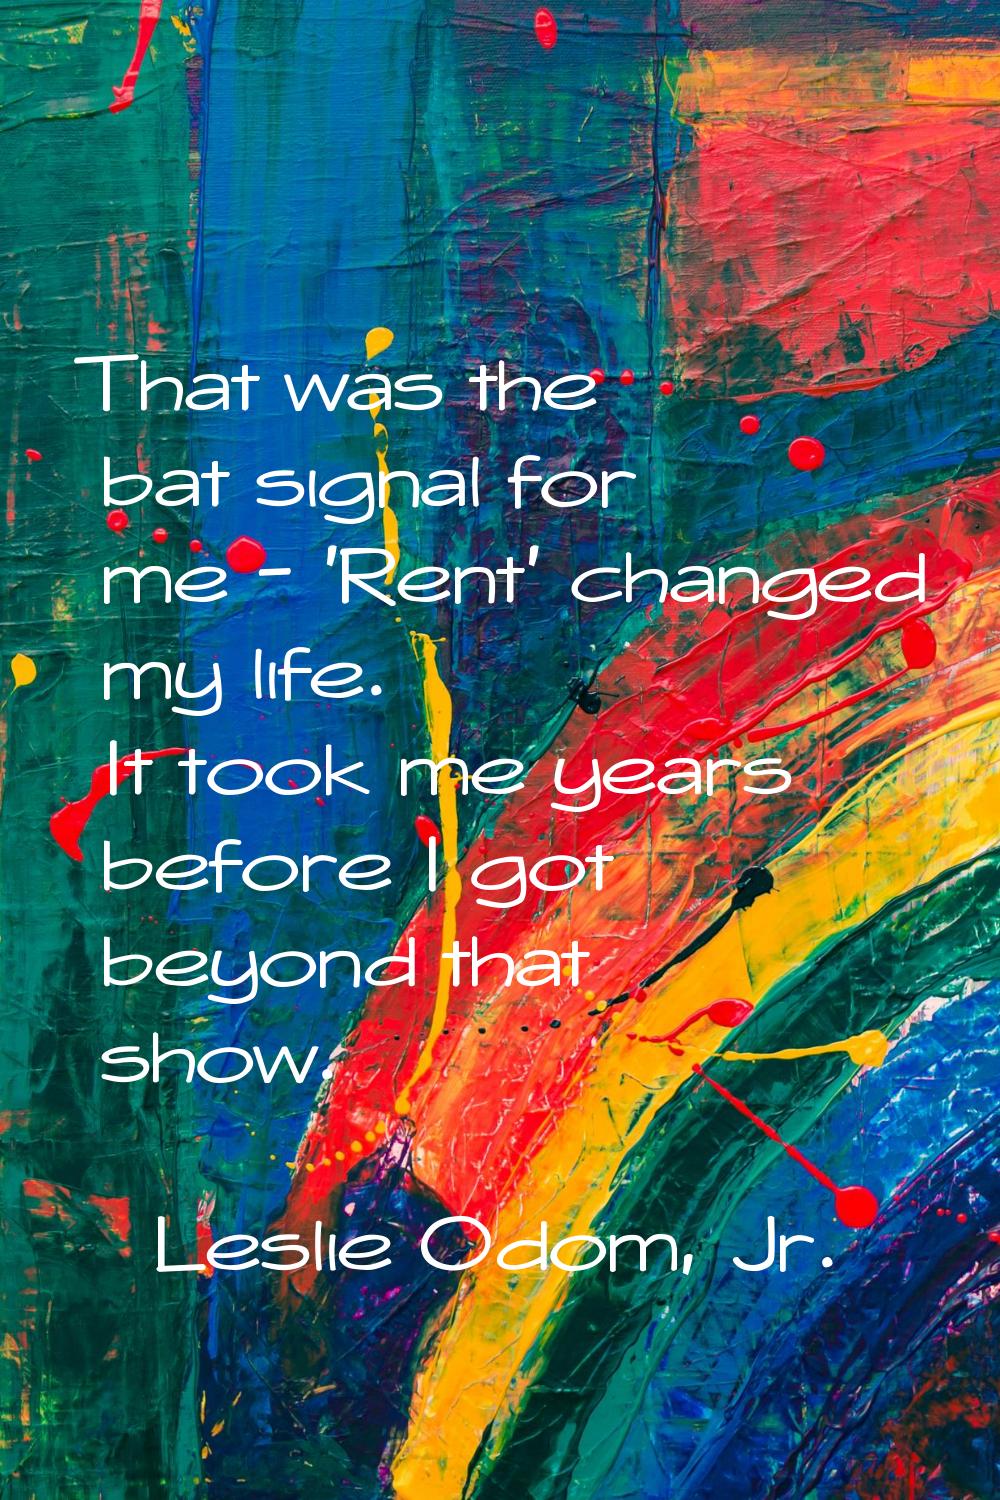 That was the bat signal for me - 'Rent' changed my life. It took me years before I got beyond that 